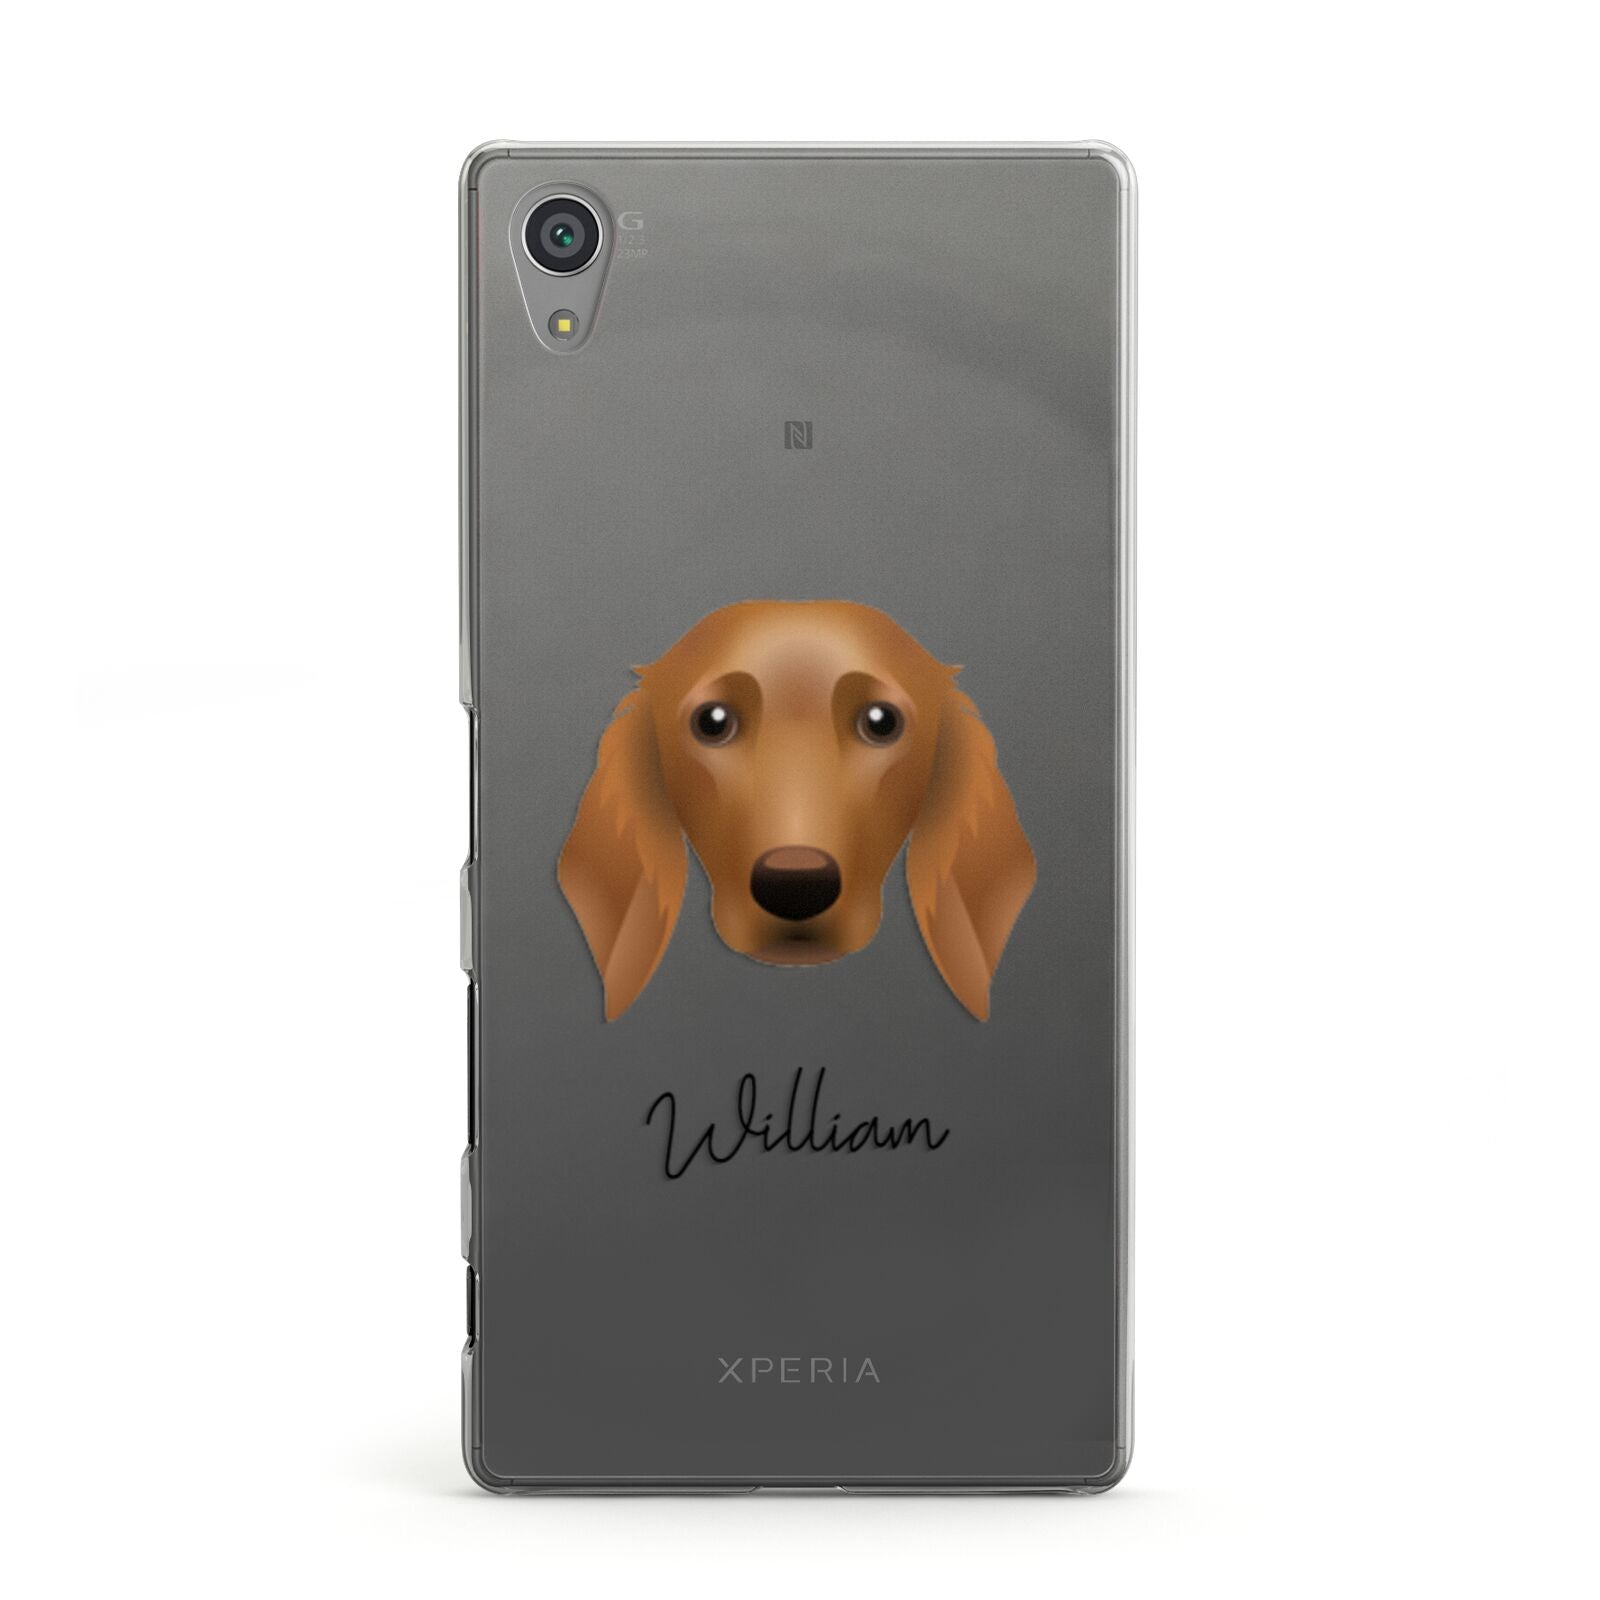 Golden Dox Personalised Sony Xperia Case